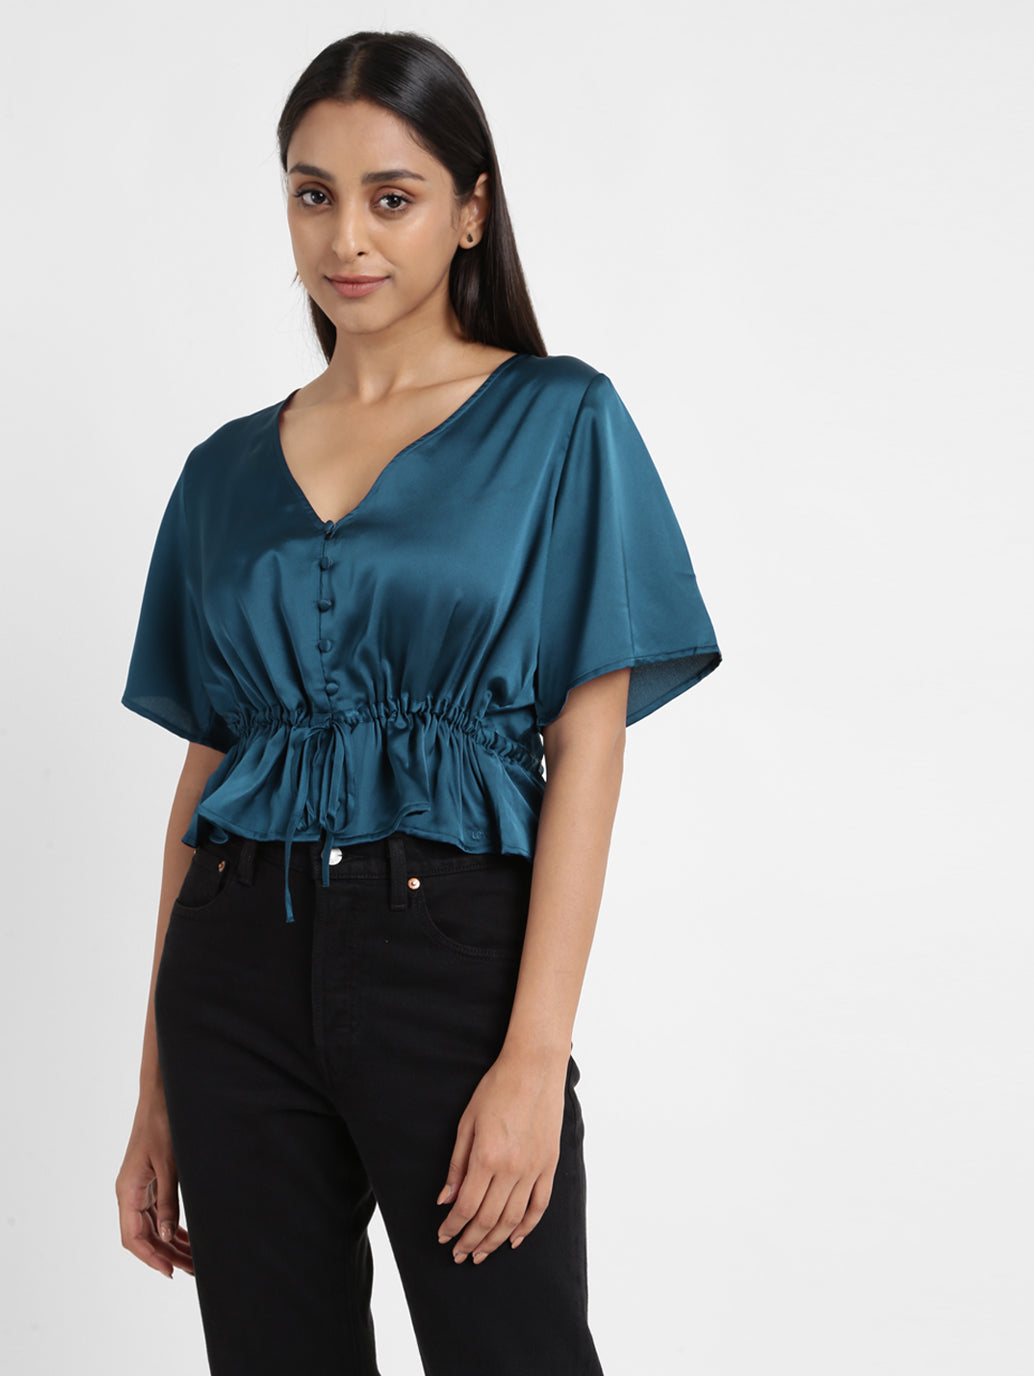 Women's Solid Green V Neck Top